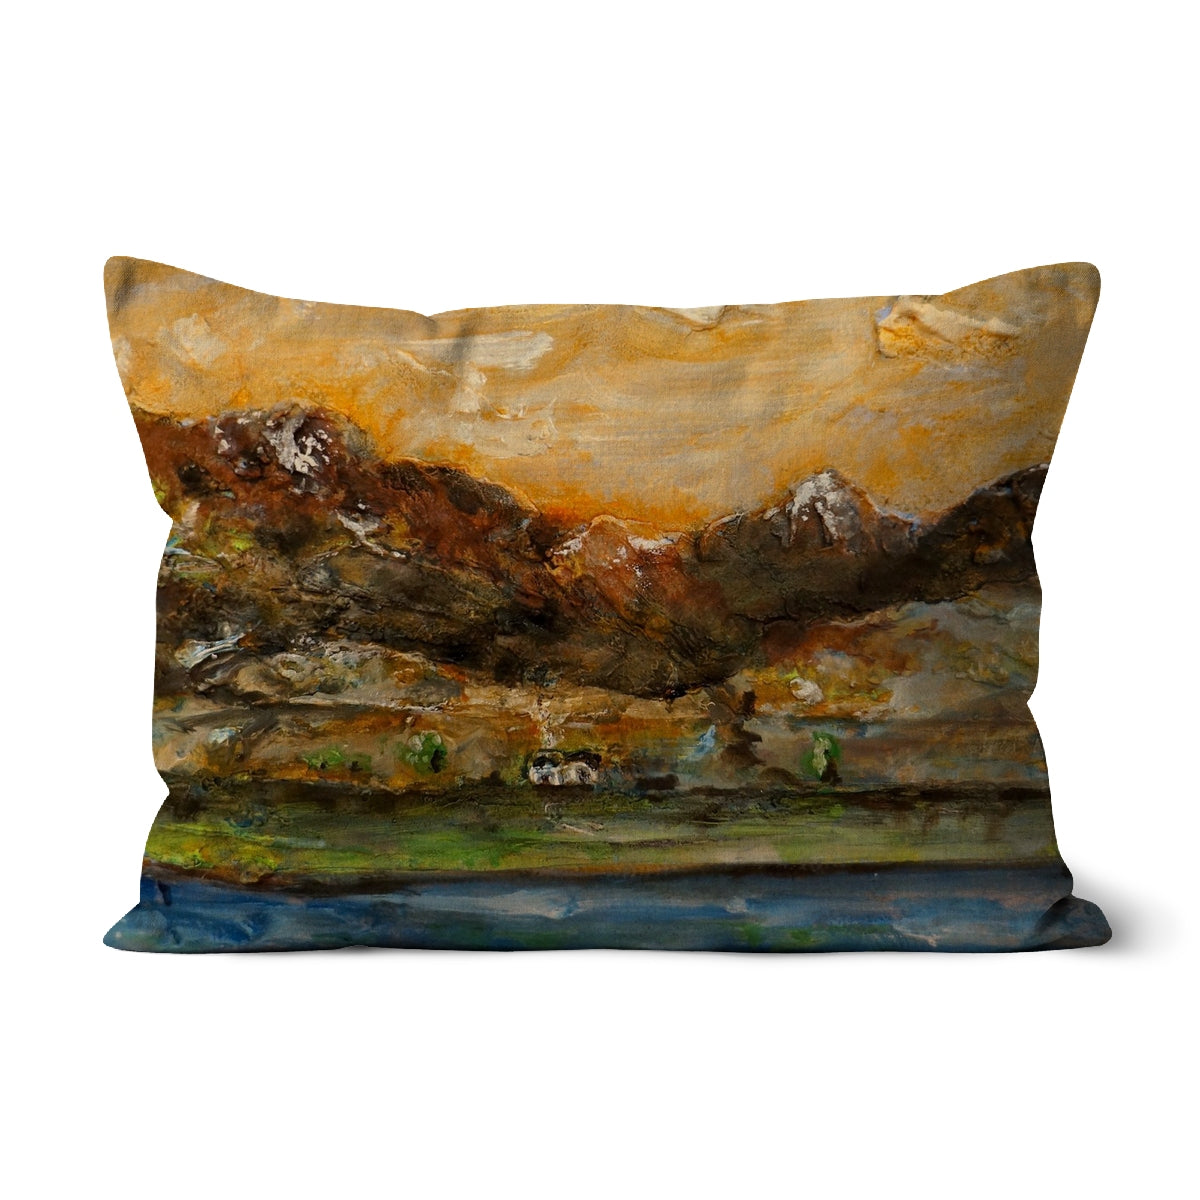 A Glencoe Cottage Art Gifts Cushion-Cushions-Glencoe Art Gallery-Canvas-19"x13"-Paintings, Prints, Homeware, Art Gifts From Scotland By Scottish Artist Kevin Hunter